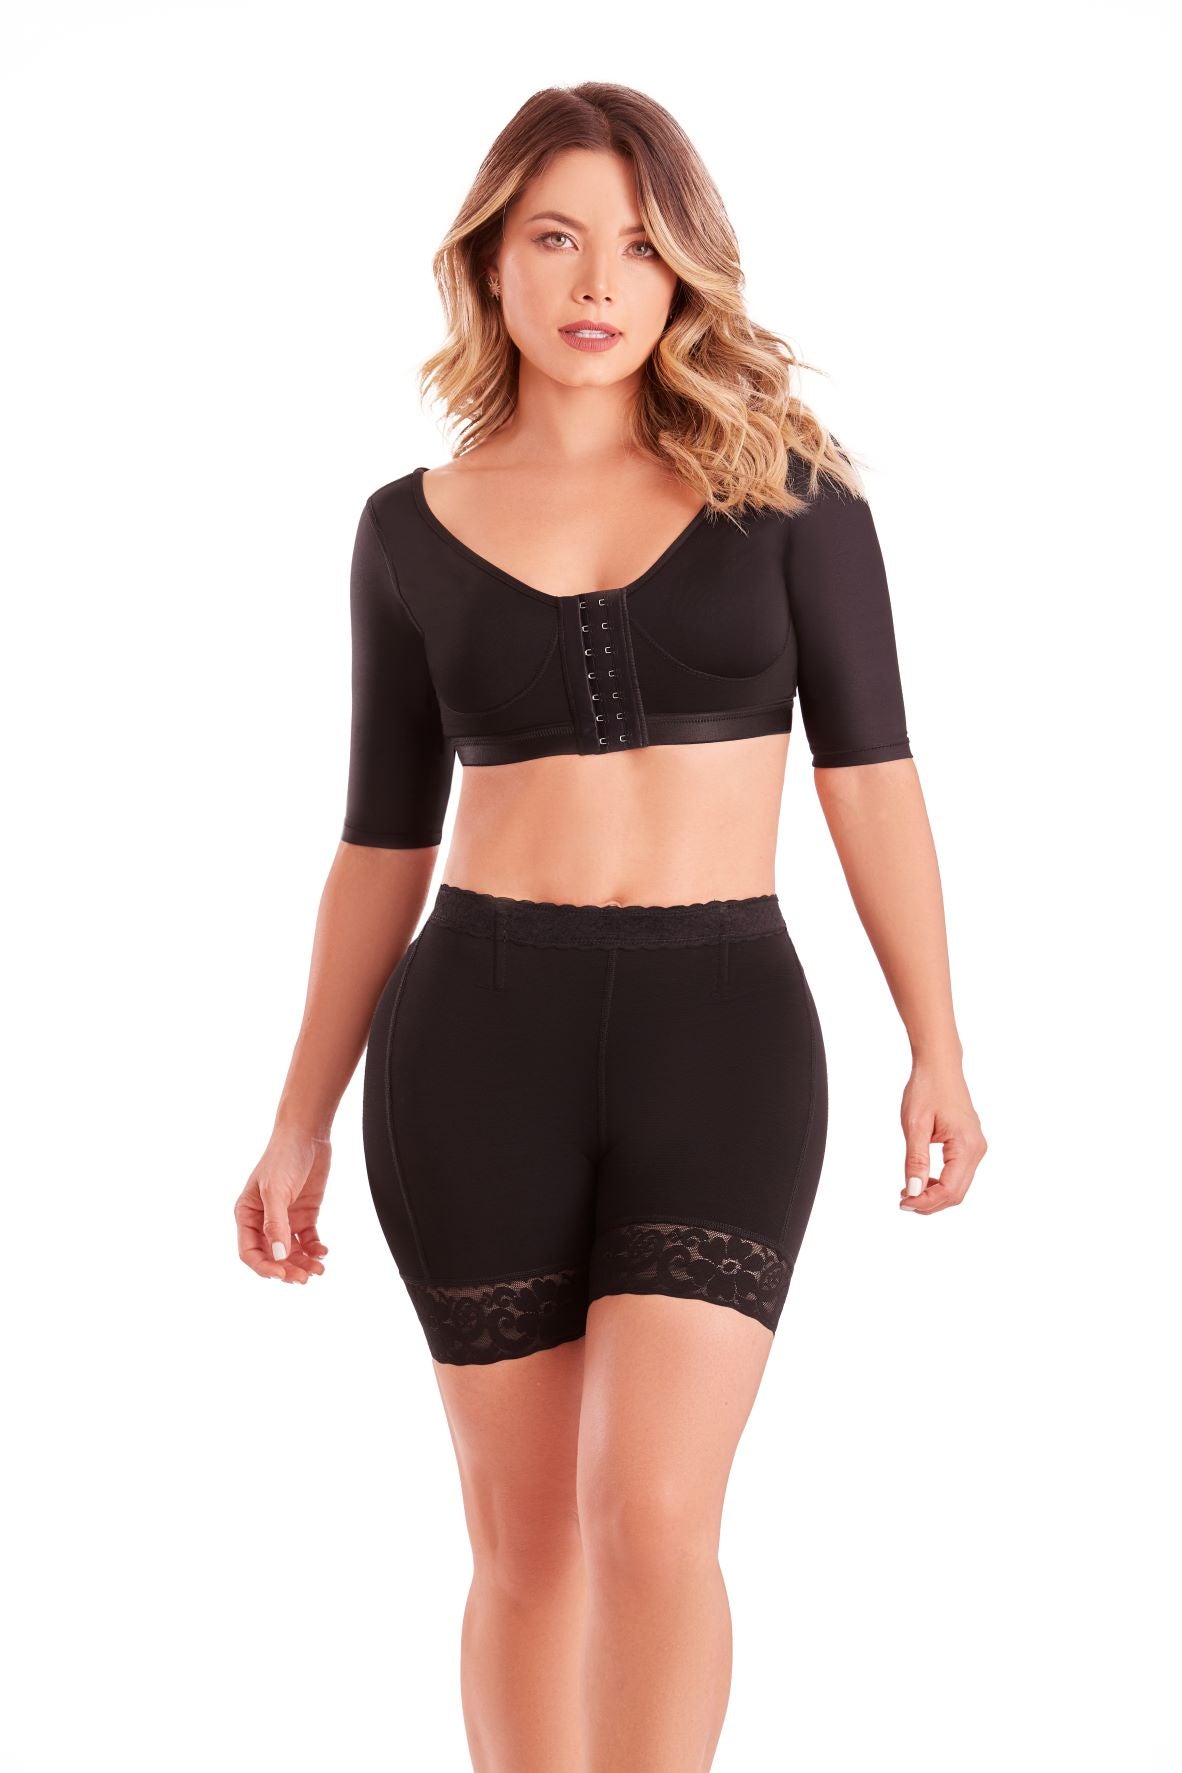 It's always a Faja day 🍑 🔍Item Name: Fajas Colombianas Women's Slimming  Butt Lifter High Waist Seamless Shorts ⏳💋🖤 Avail